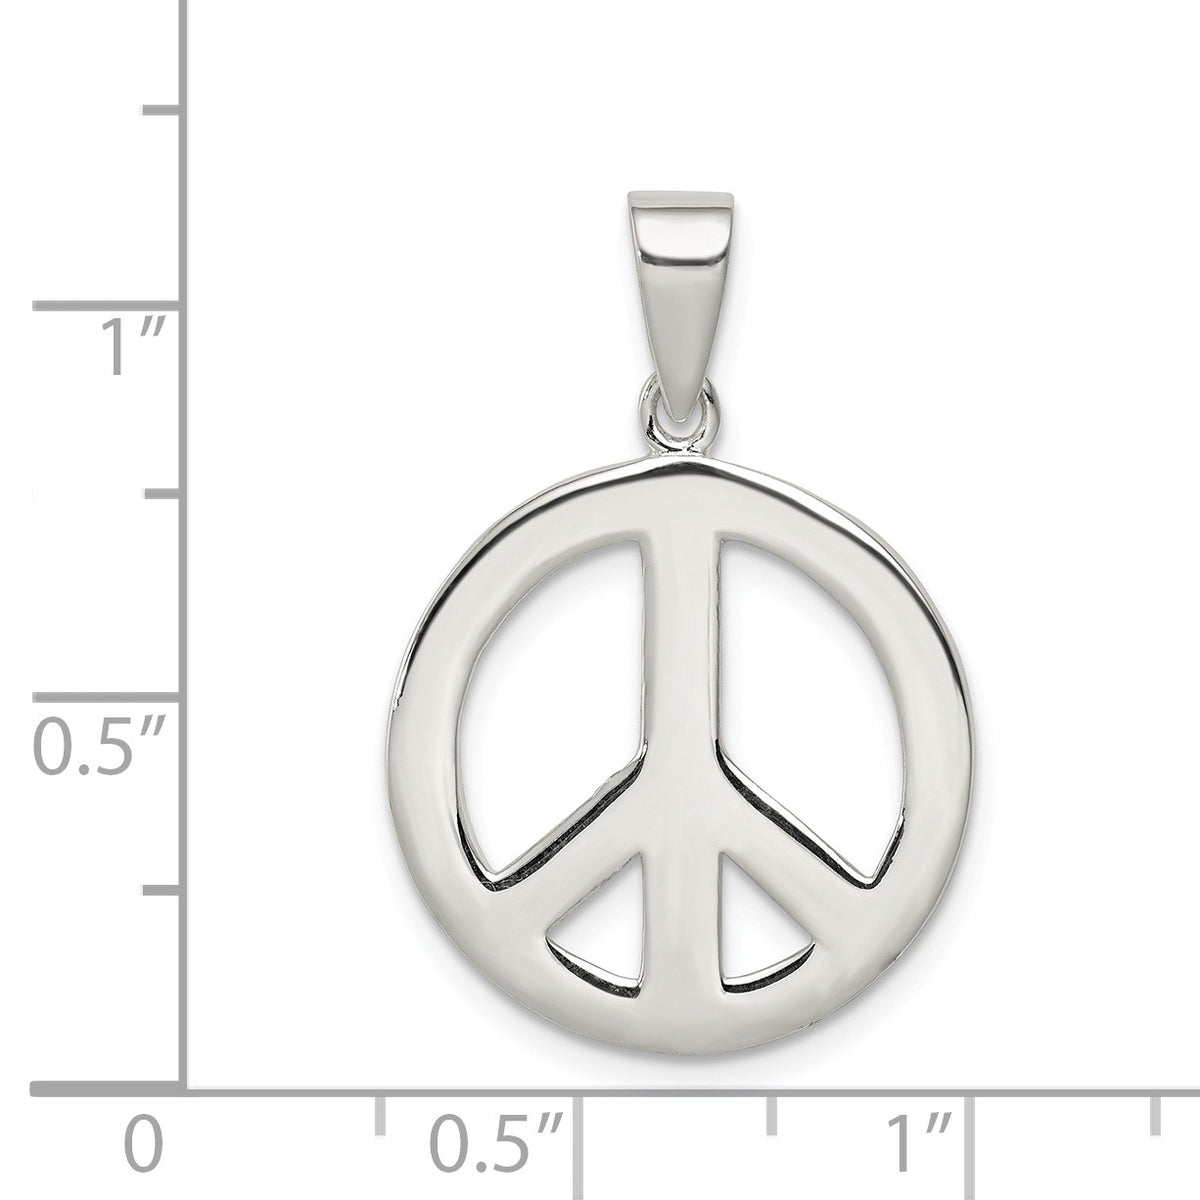 Alternate view of the Sterling Silver 19mm Polished Peace Symbol Pendant by The Black Bow Jewelry Co.